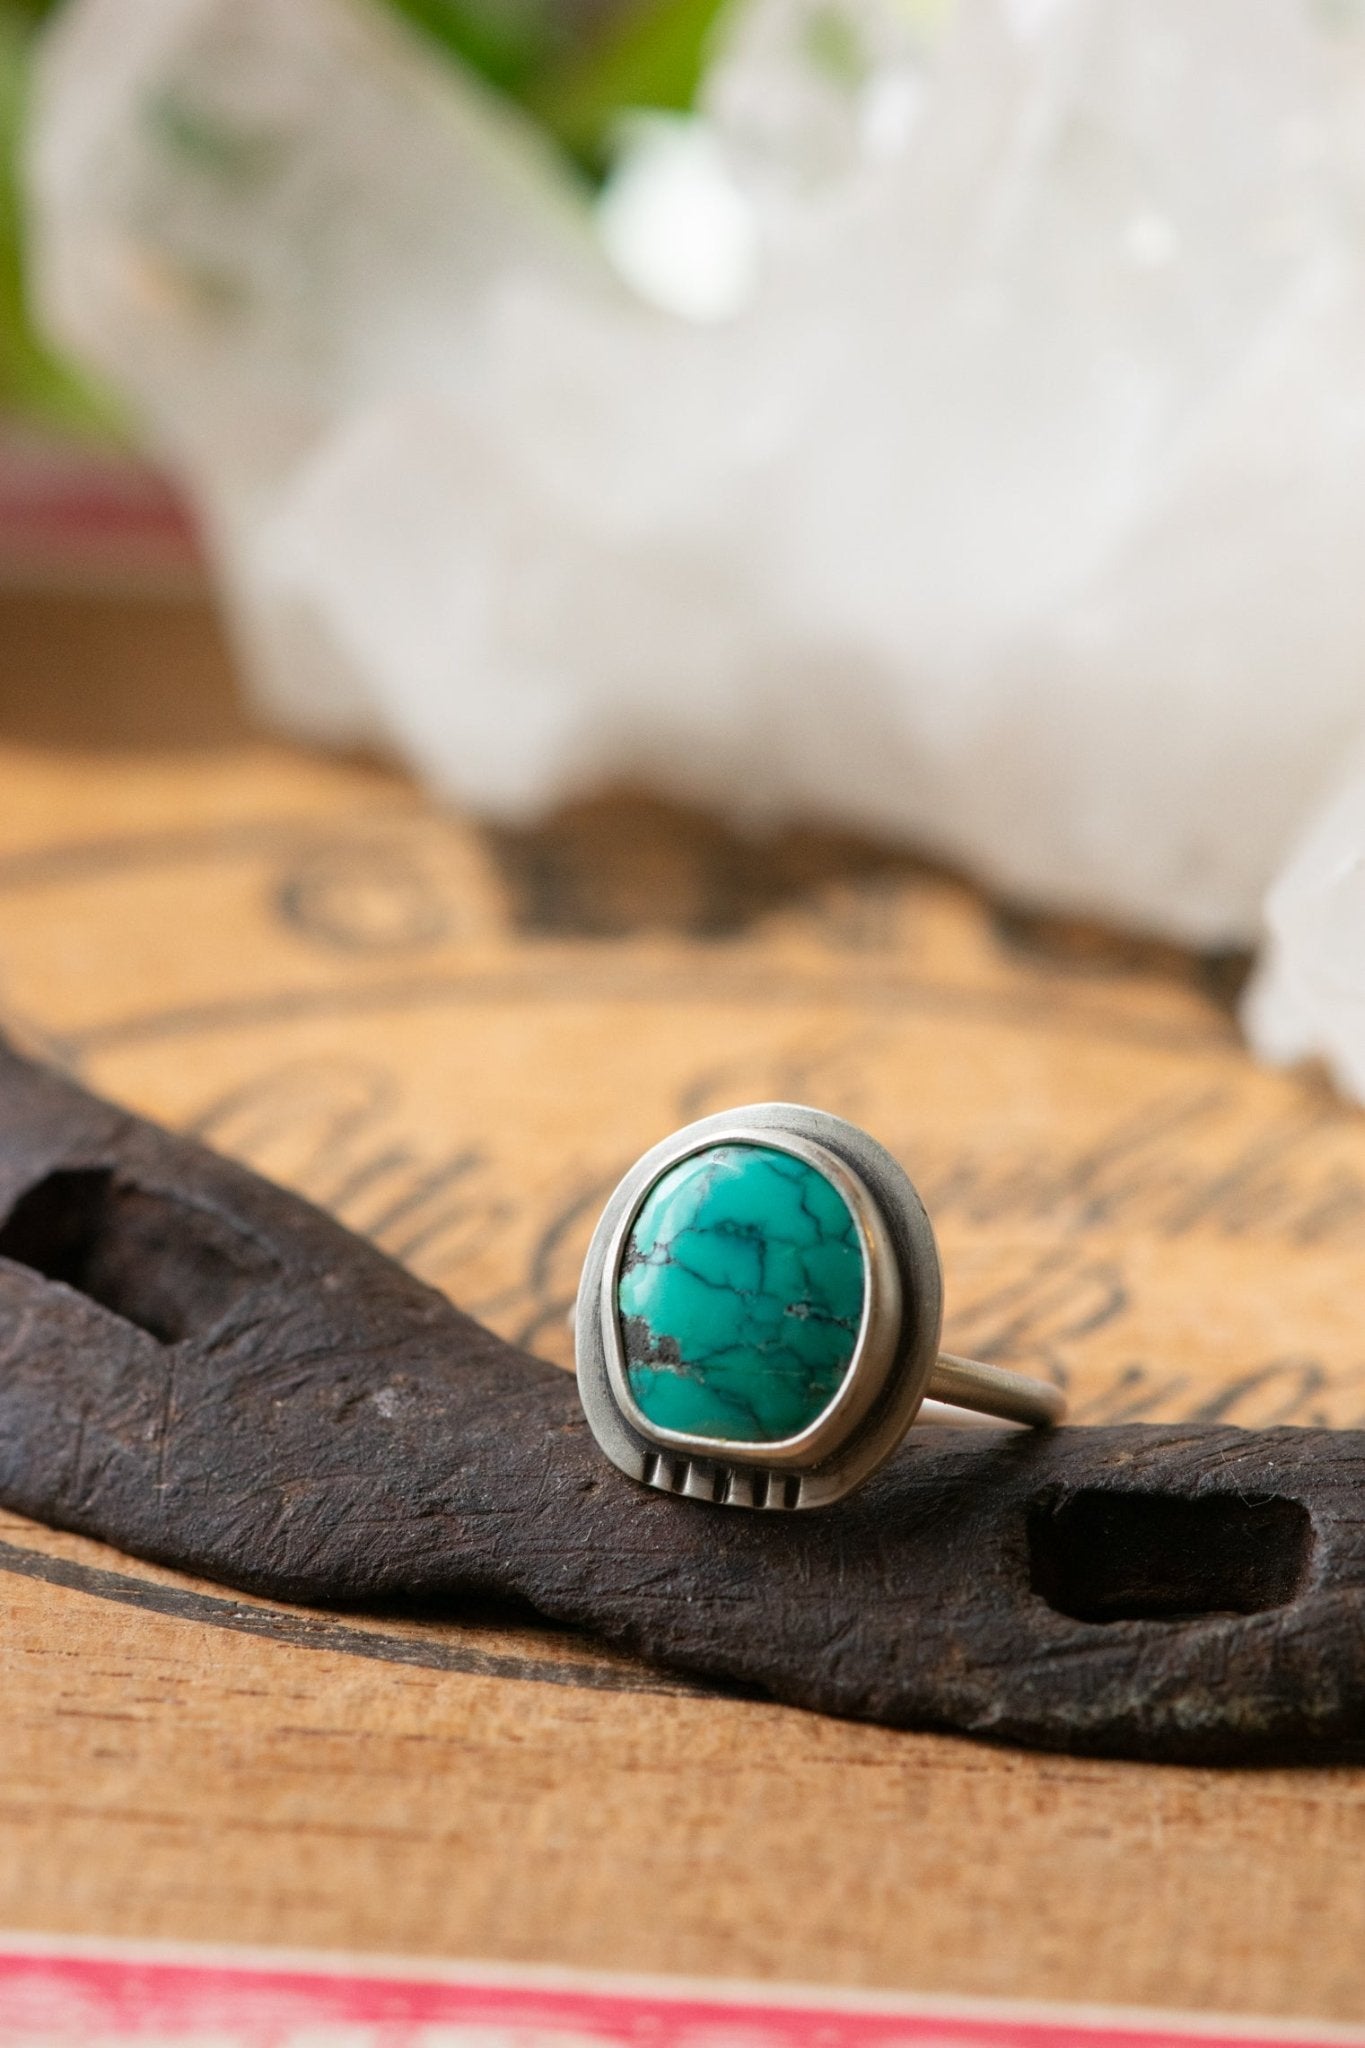 SKY STONE TURQUOISE RING - Fly Free